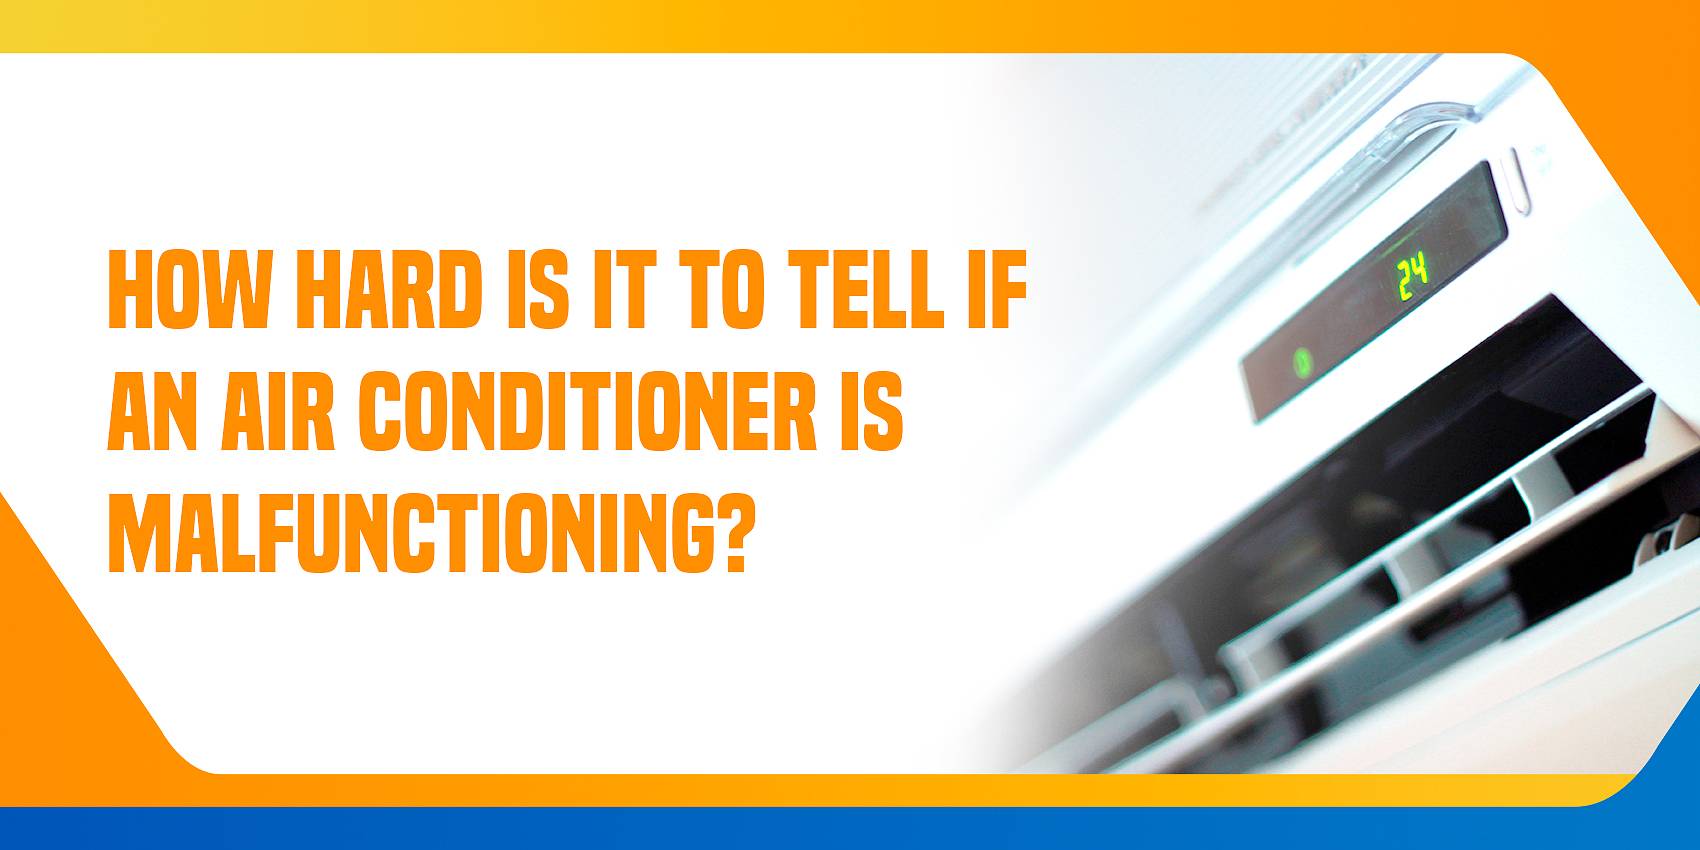 How Hard Is It to Tell if An Air Conditioner Is Malfunctioning?